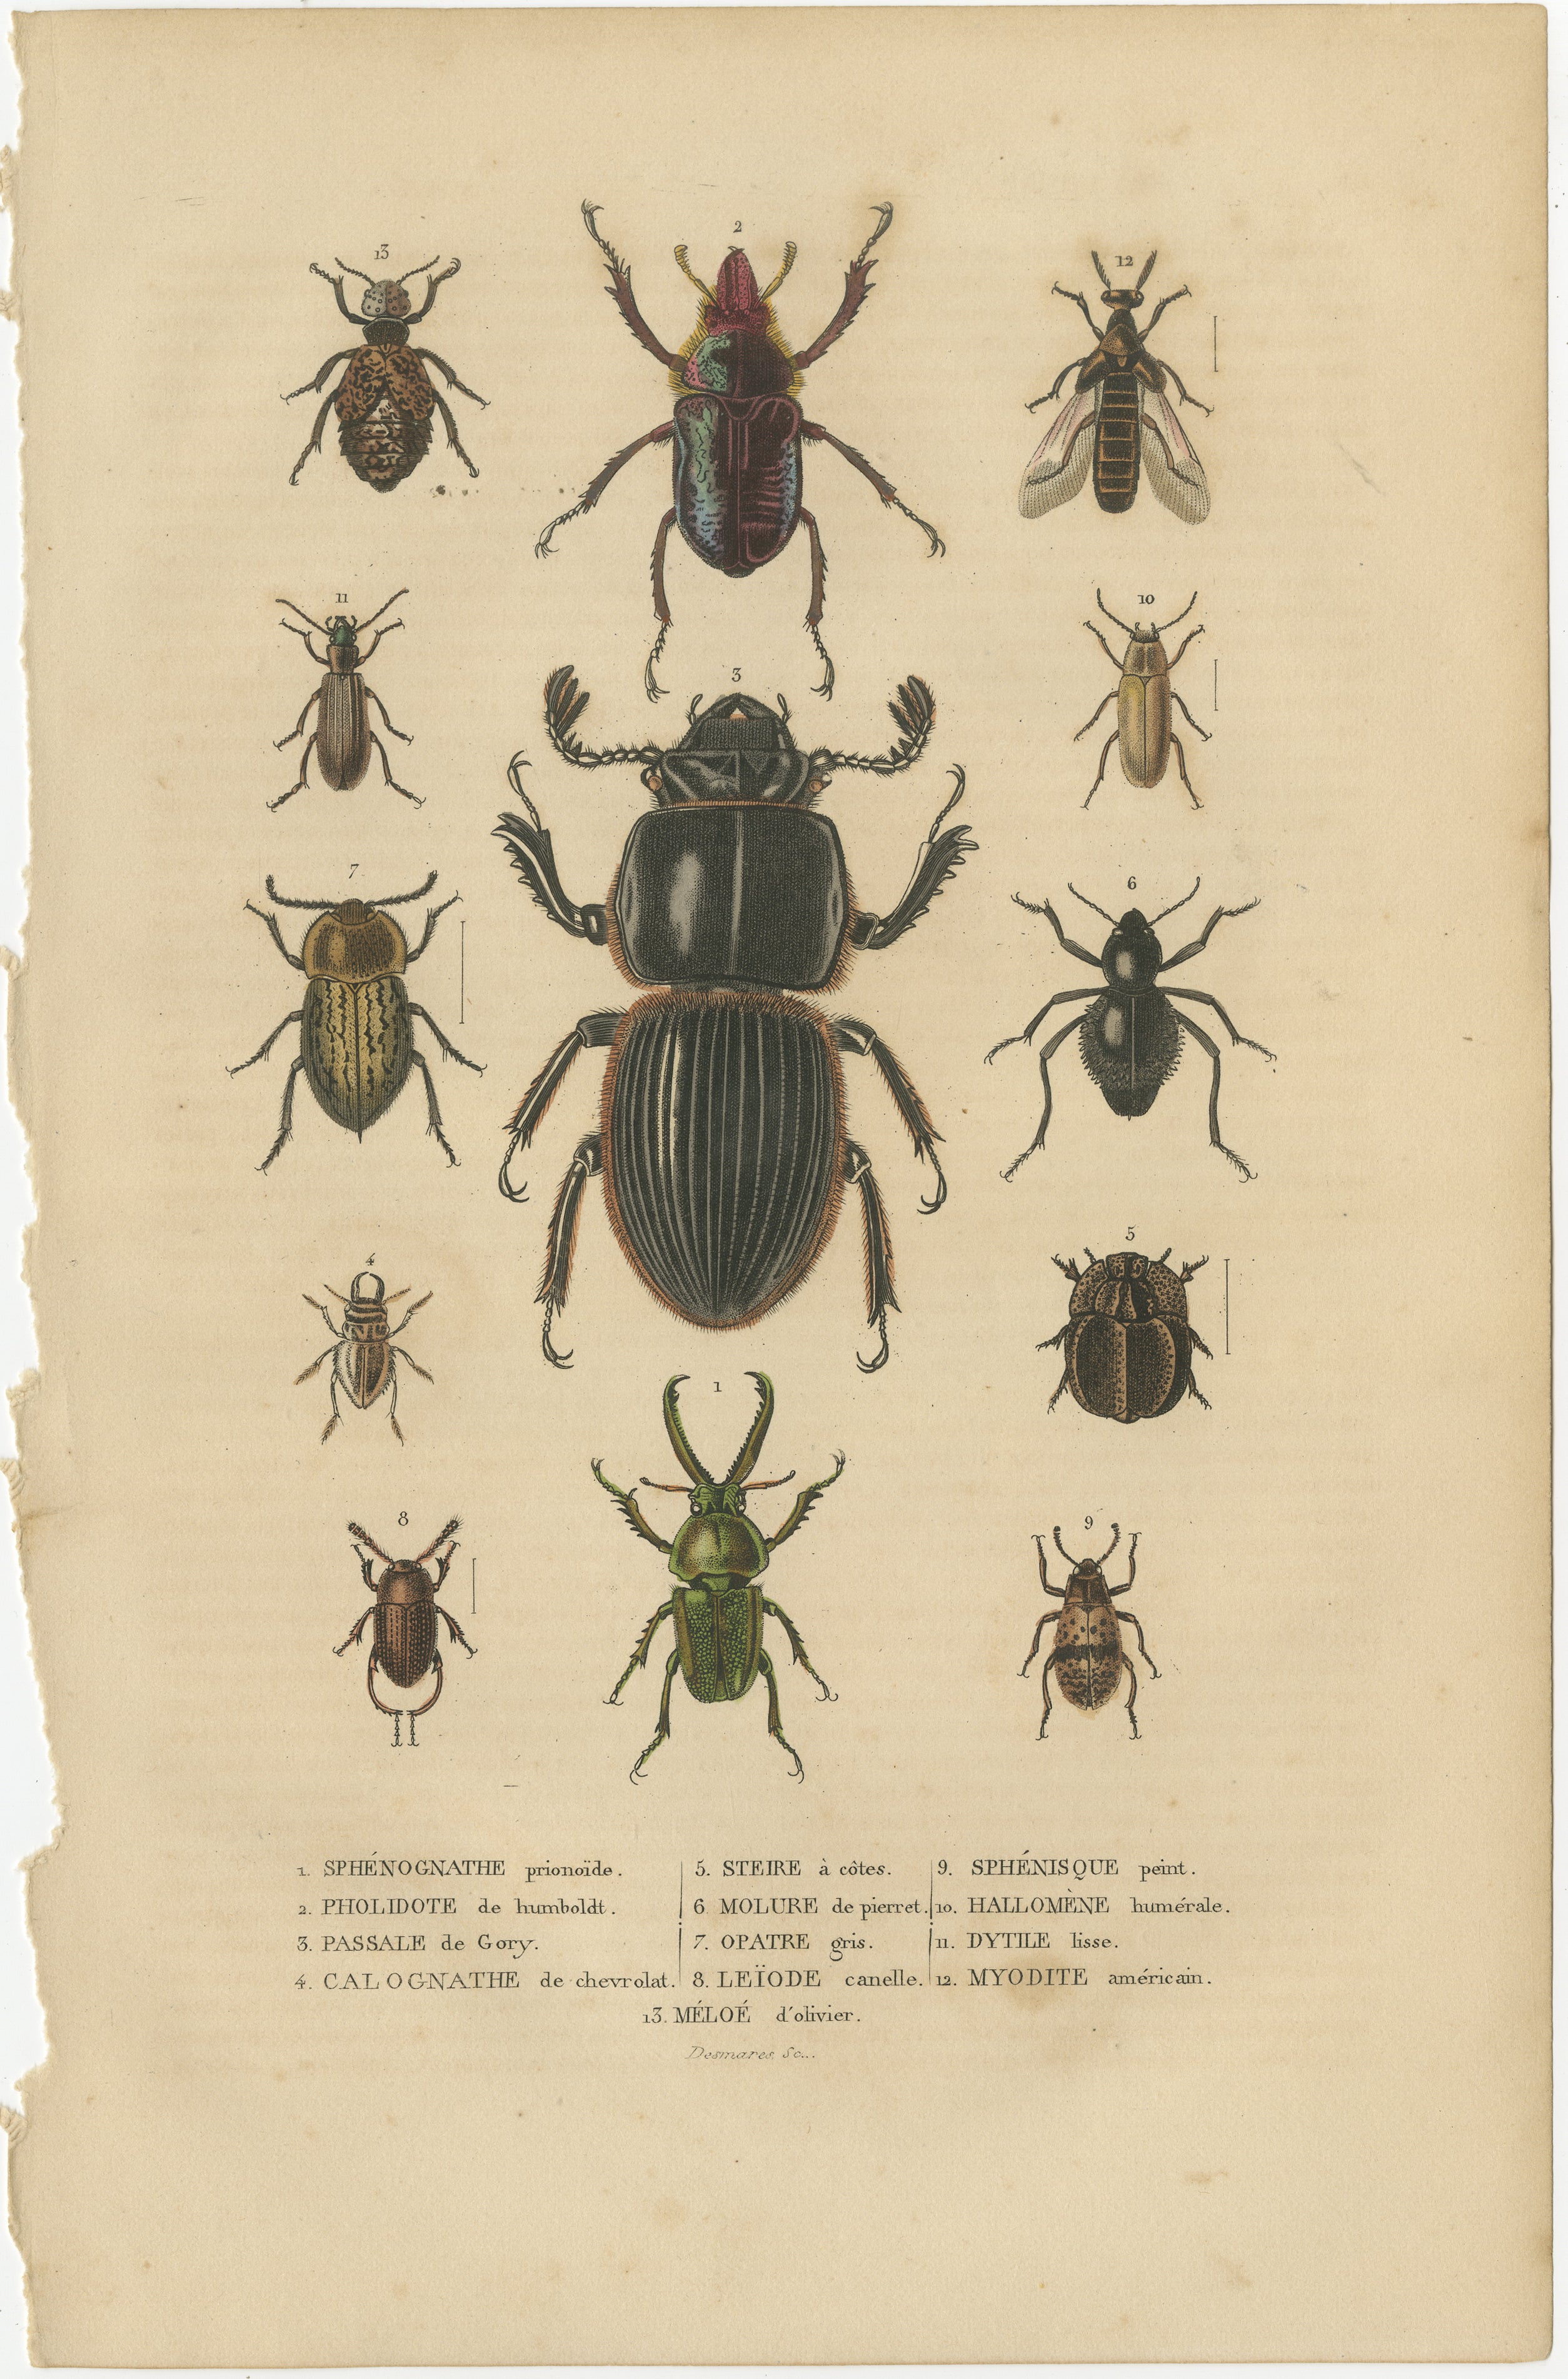 Antique hand-colored print depicting various beetles. Each beetle is meticulously illustrated, likely hand-colored after printing, which was the style of the mid-19th century scientific illustrations. The image includes a key at the bottom, which